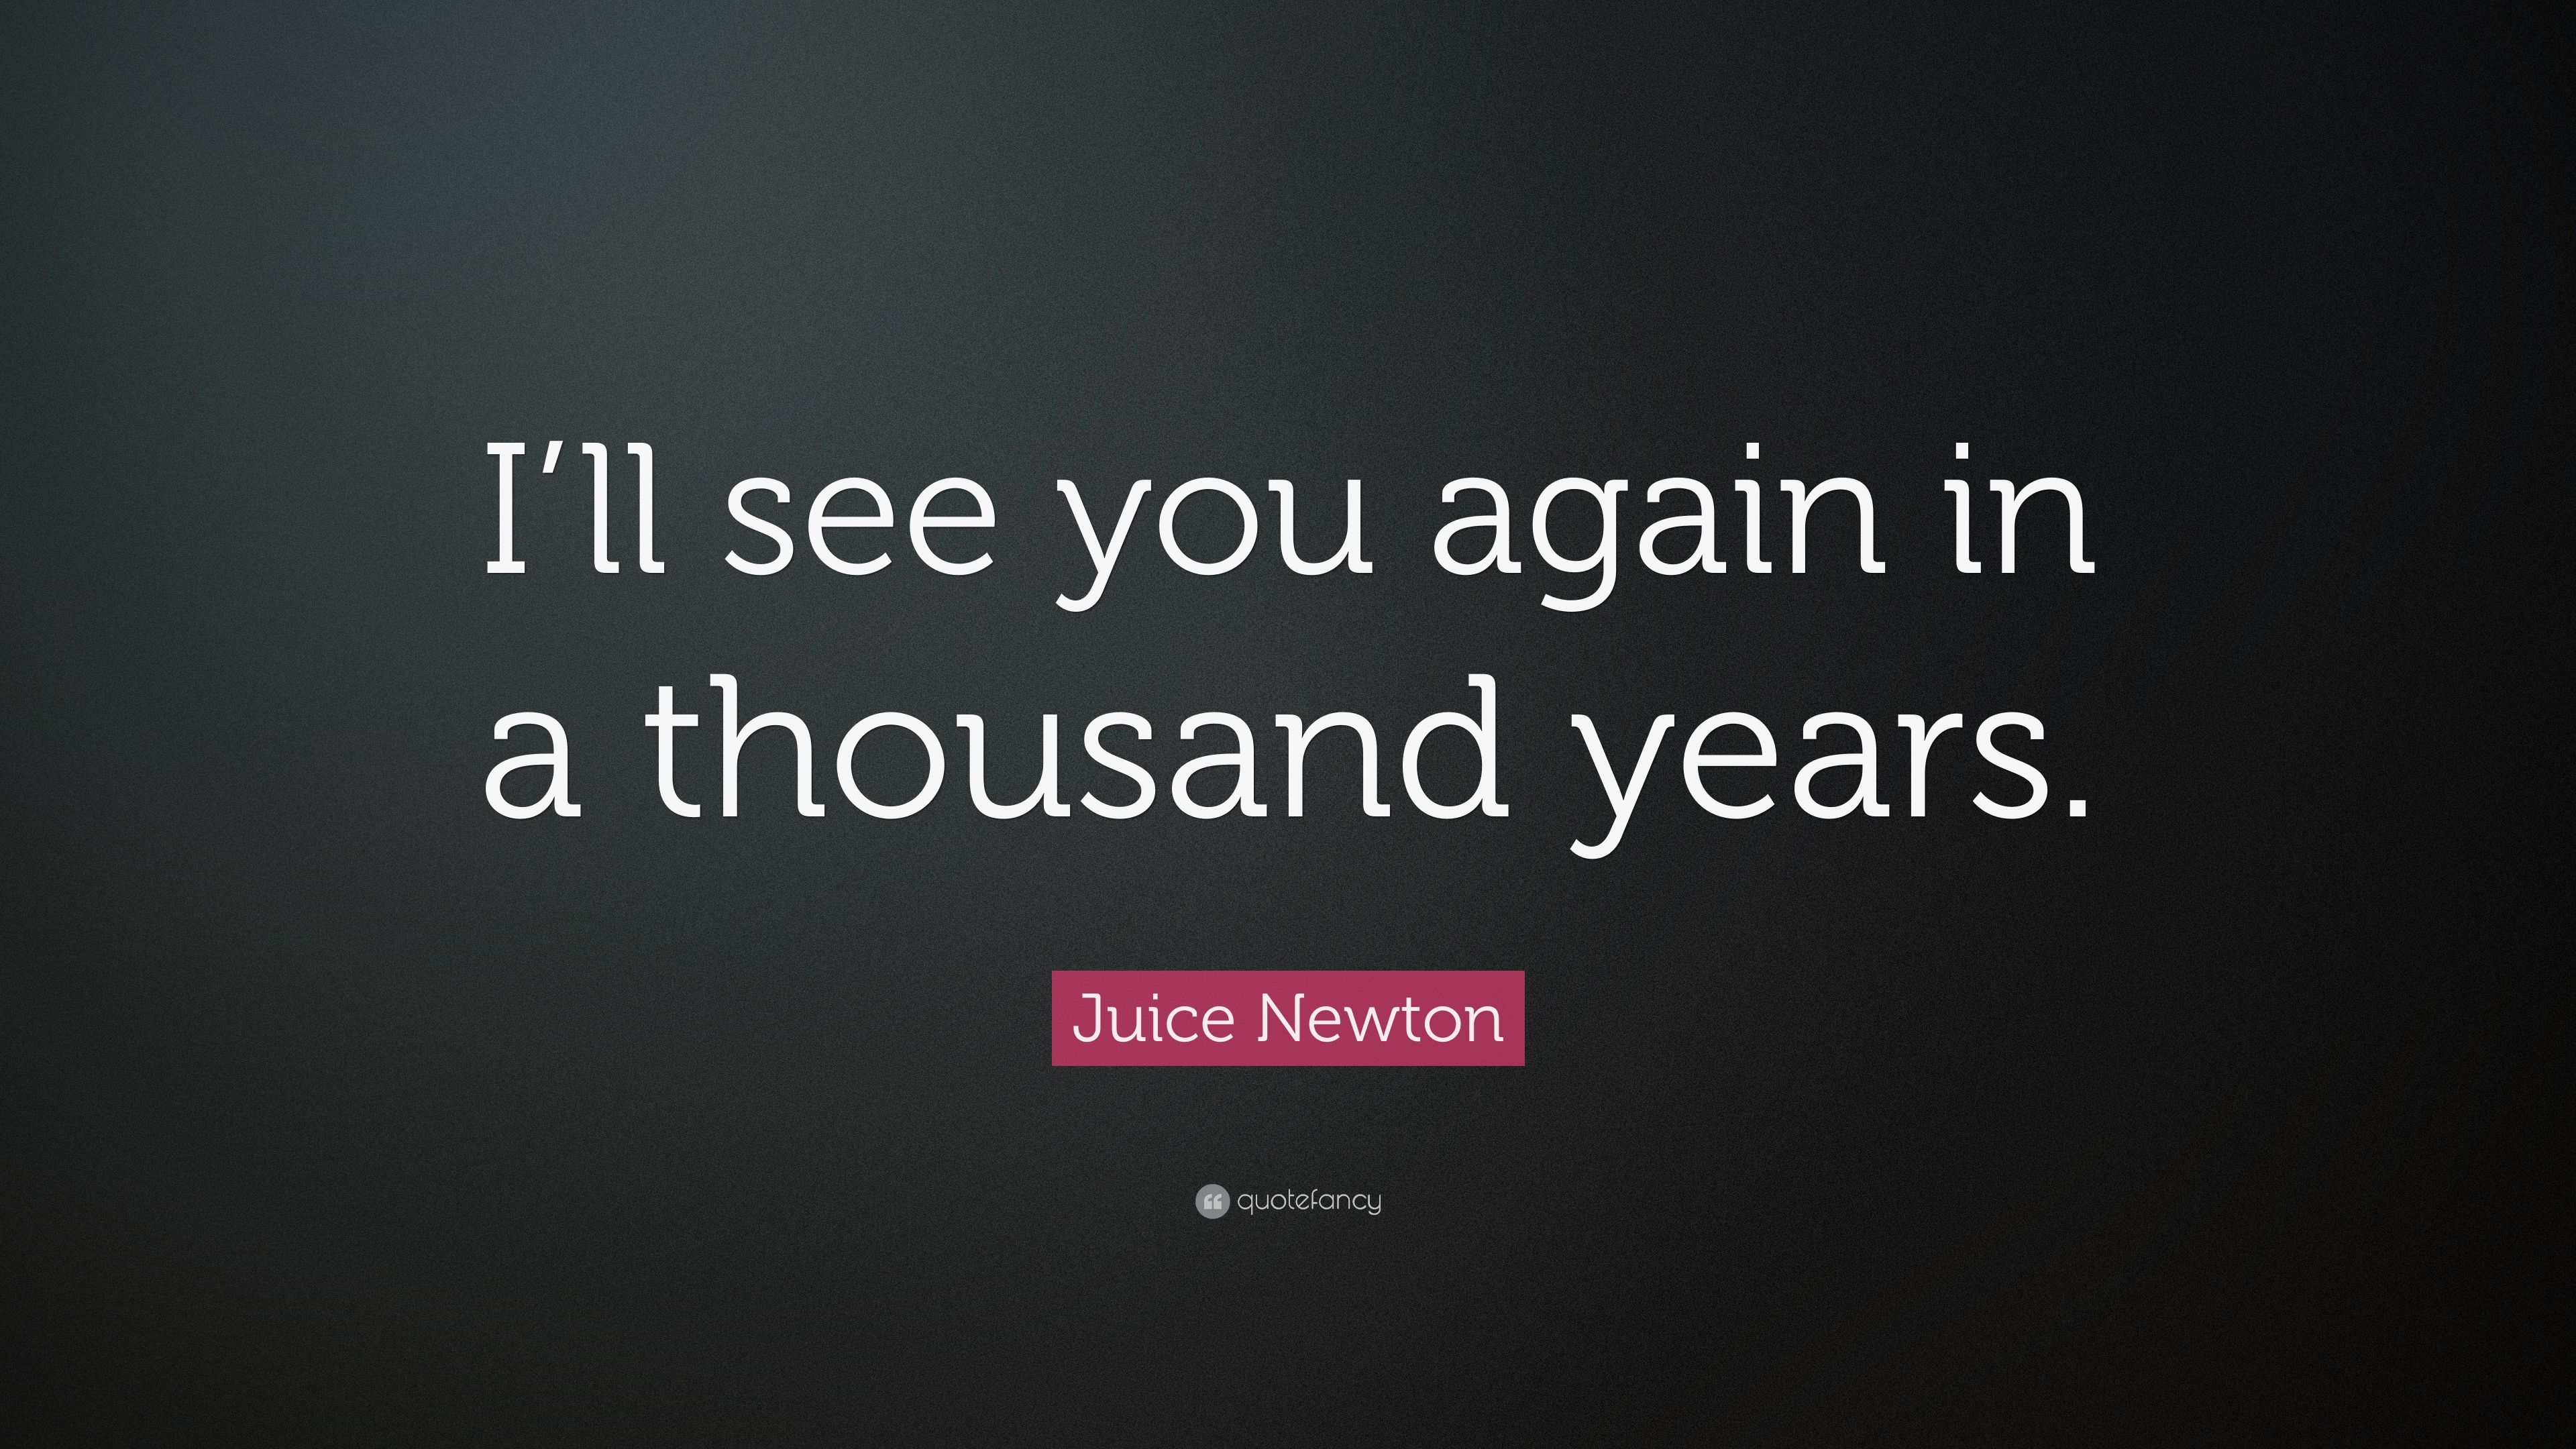 Juice Newton Quote: “I'll see you again in a thousand years.” 7